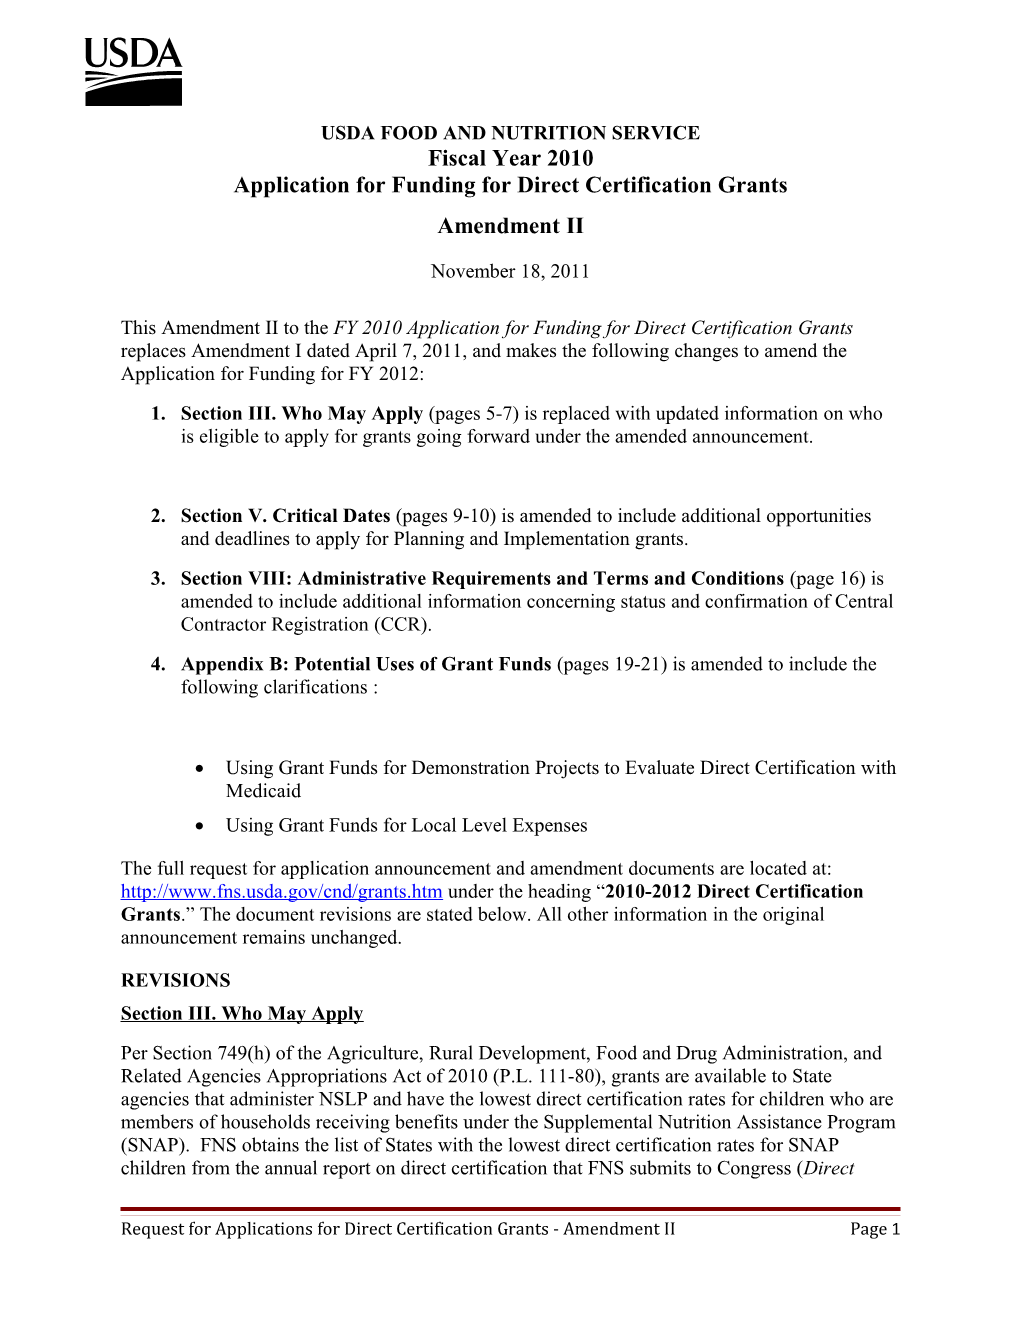 Application for Funding for Direct Certification Grants